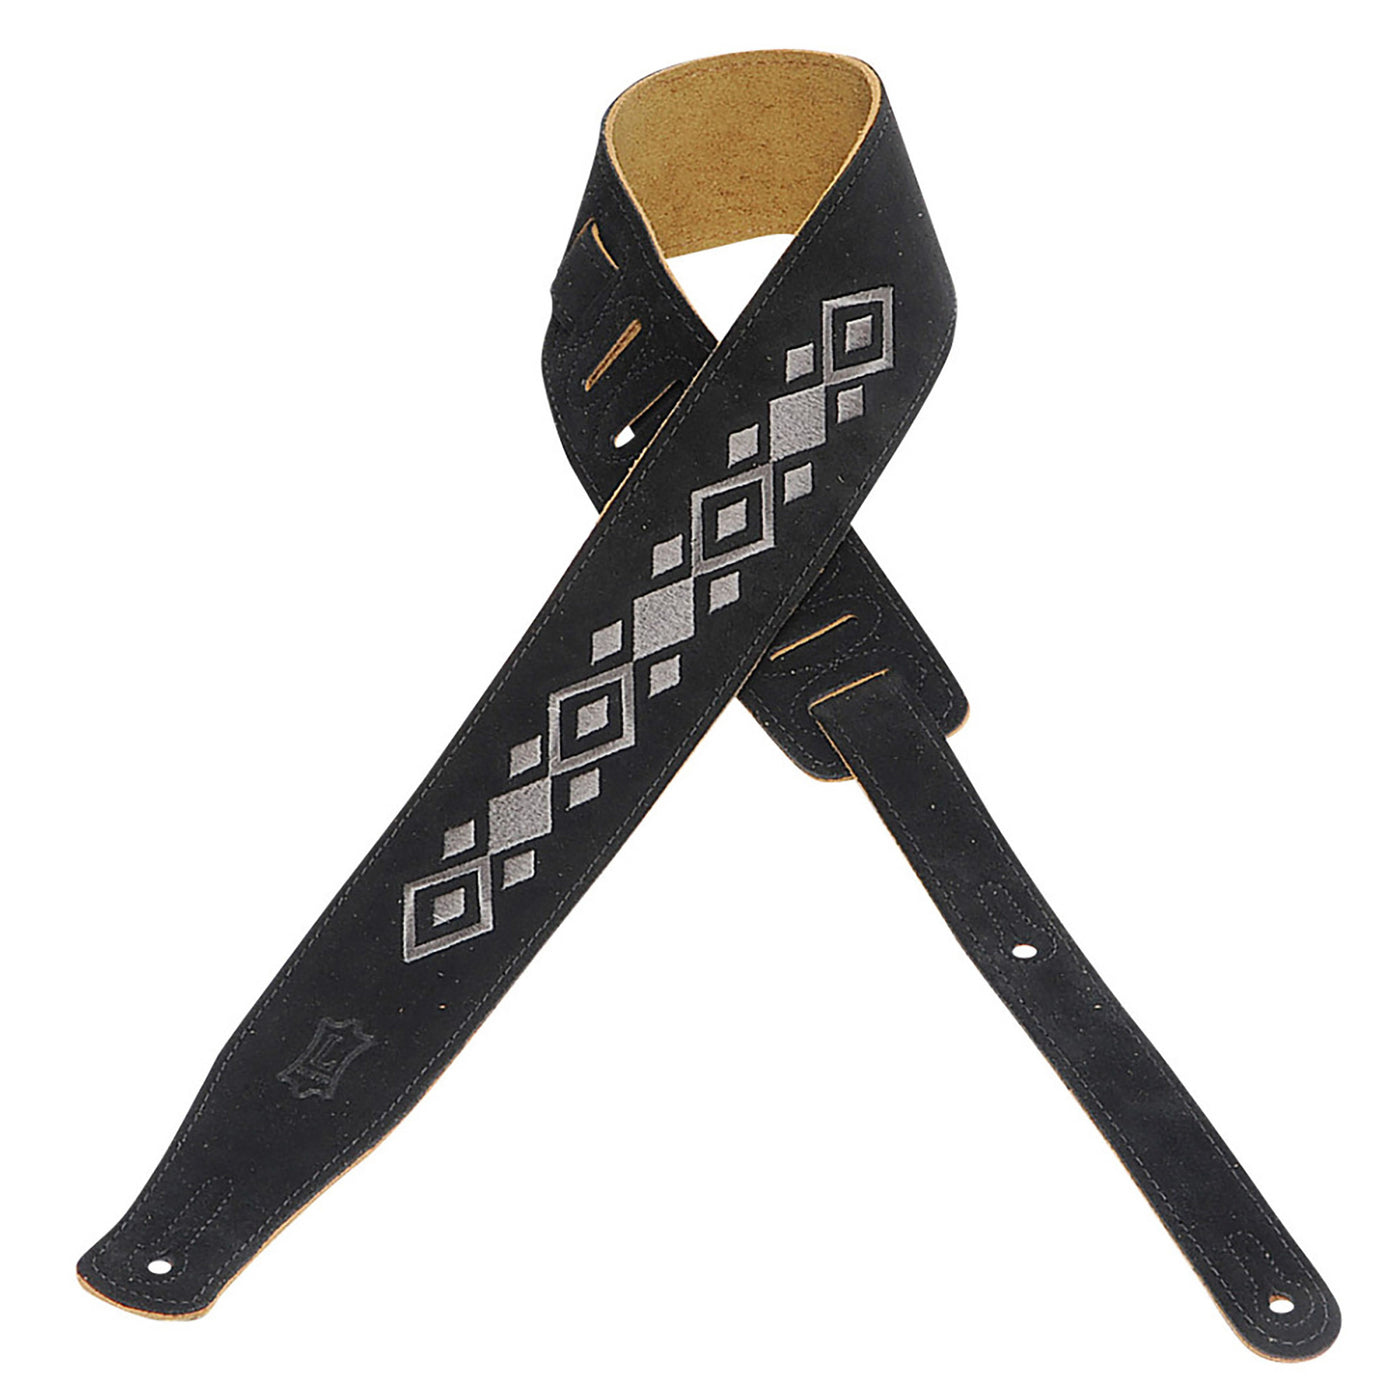 Levy's 2.5" Suede Strap Embroidered Diamond in Black